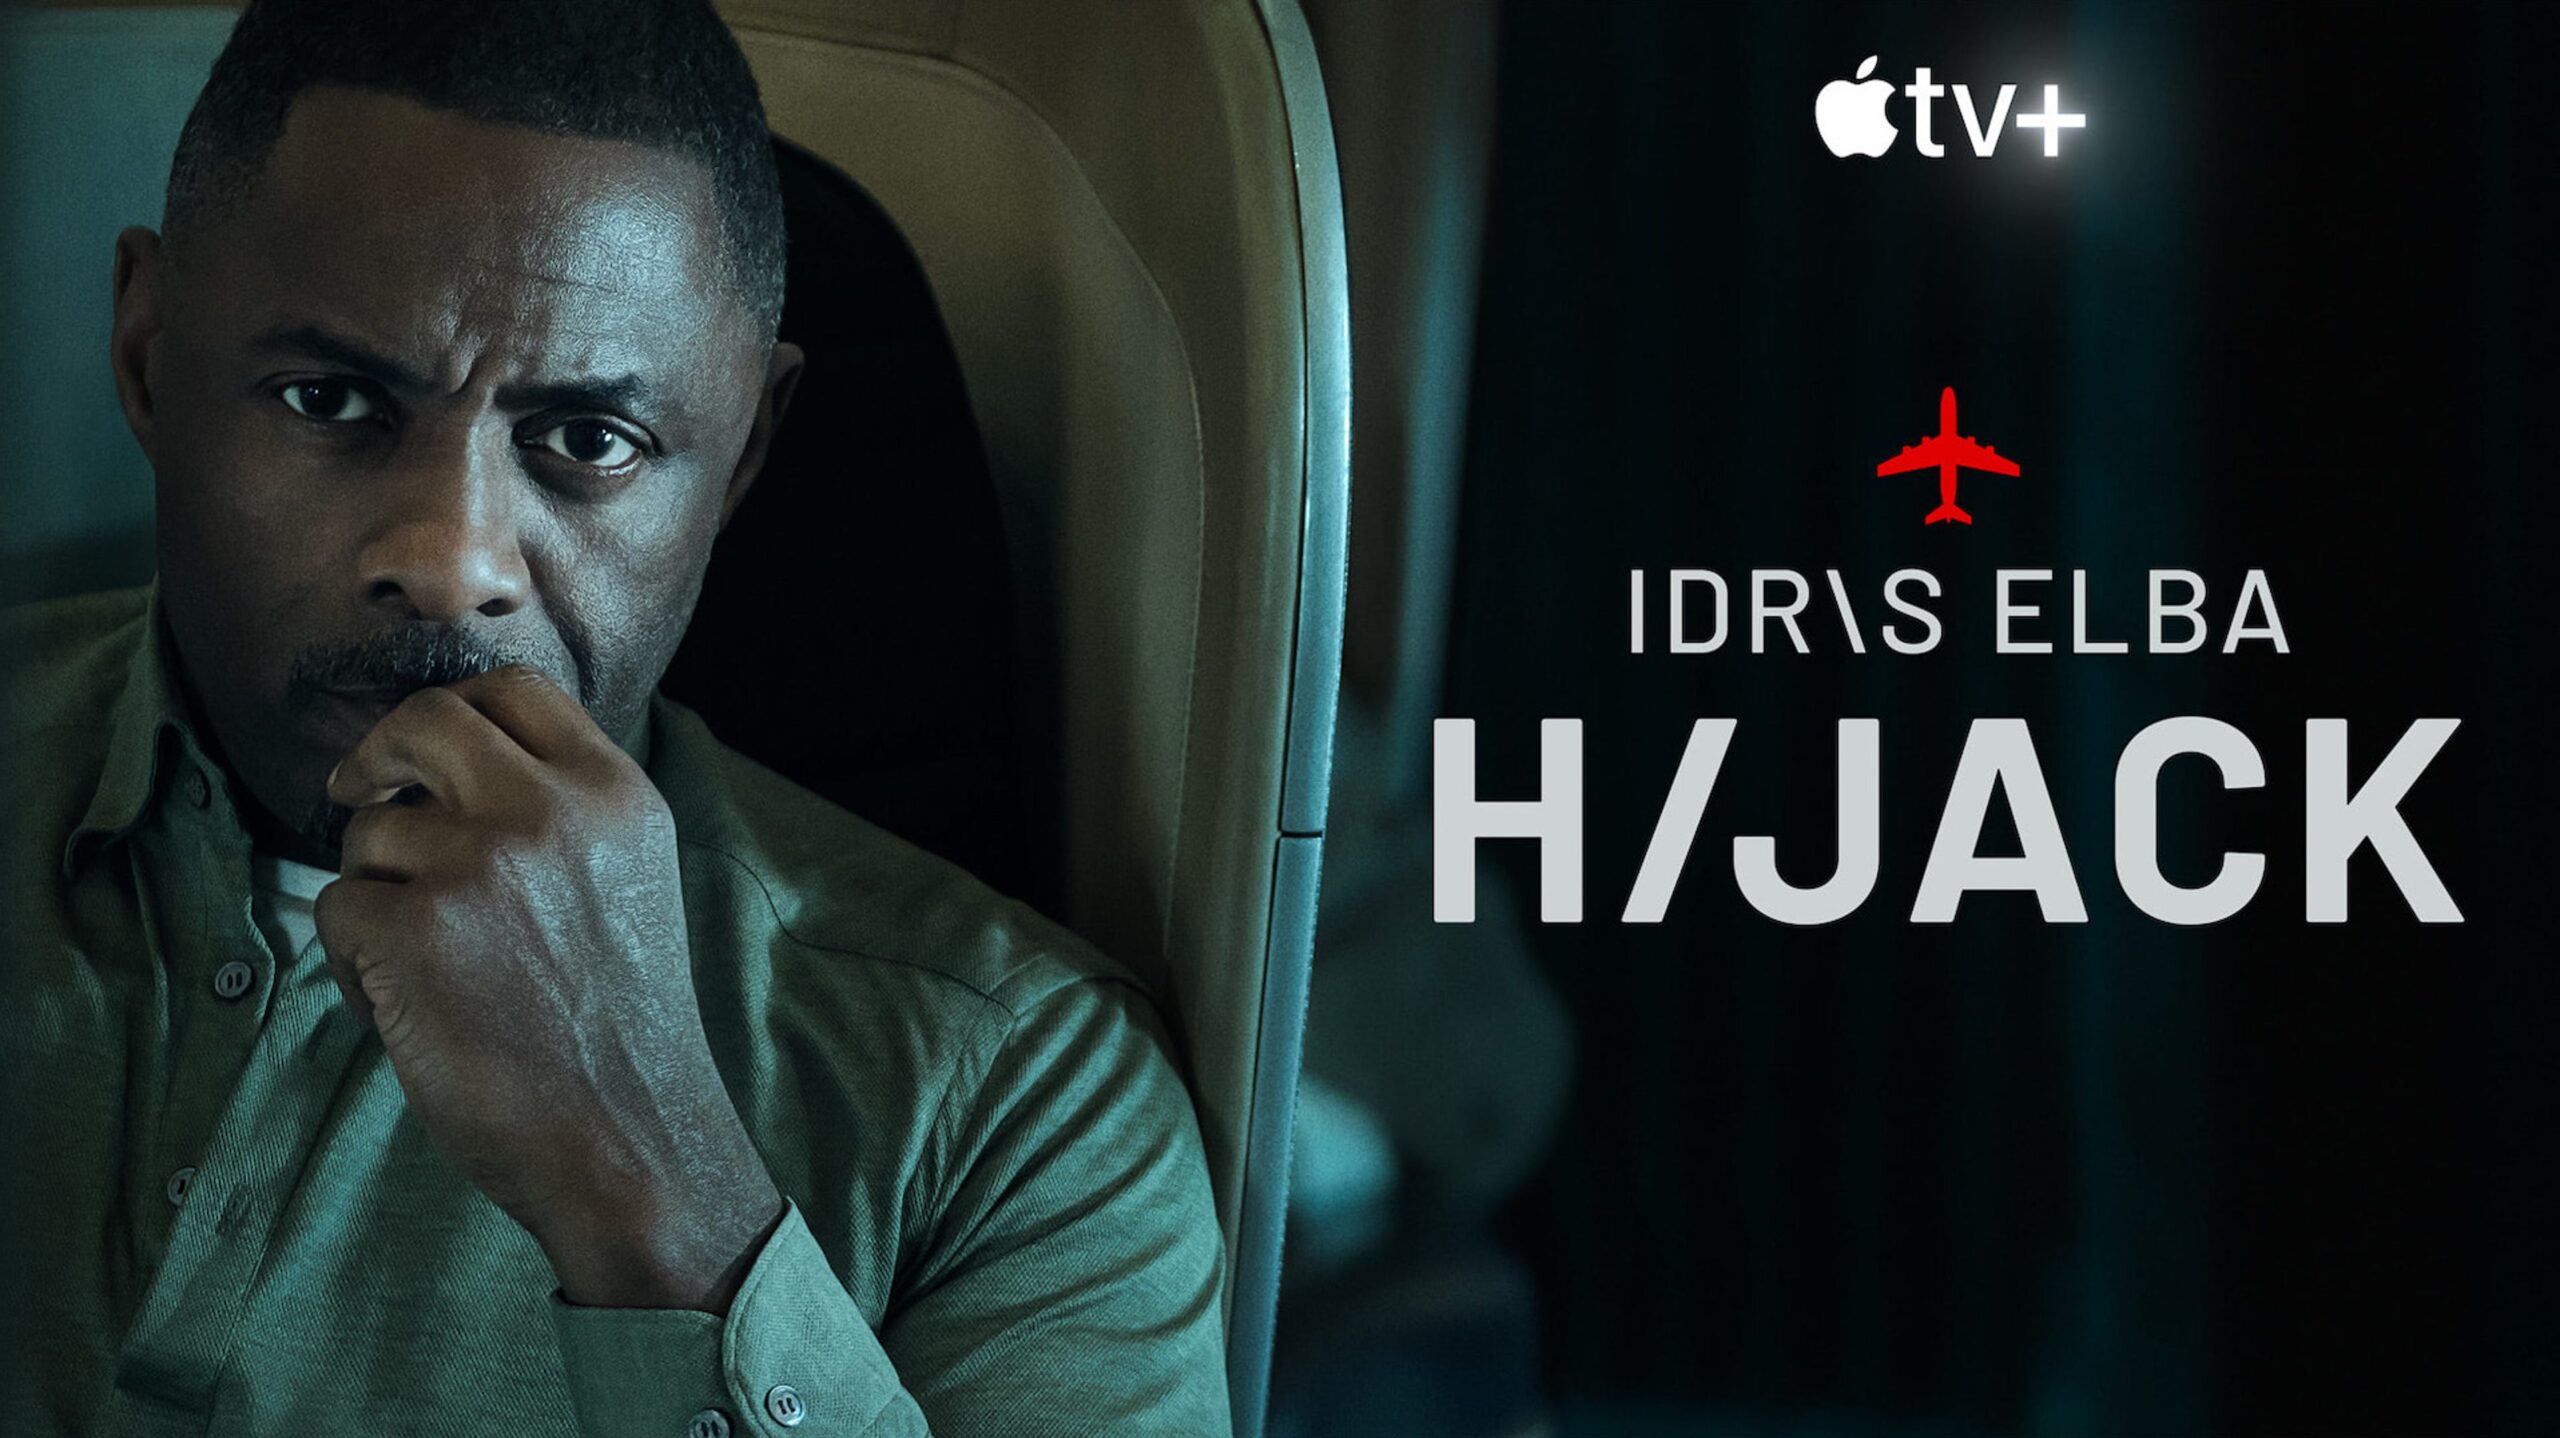 hijack-review:-apple-tv-+-offre-un-thriller-in-tempo-reale